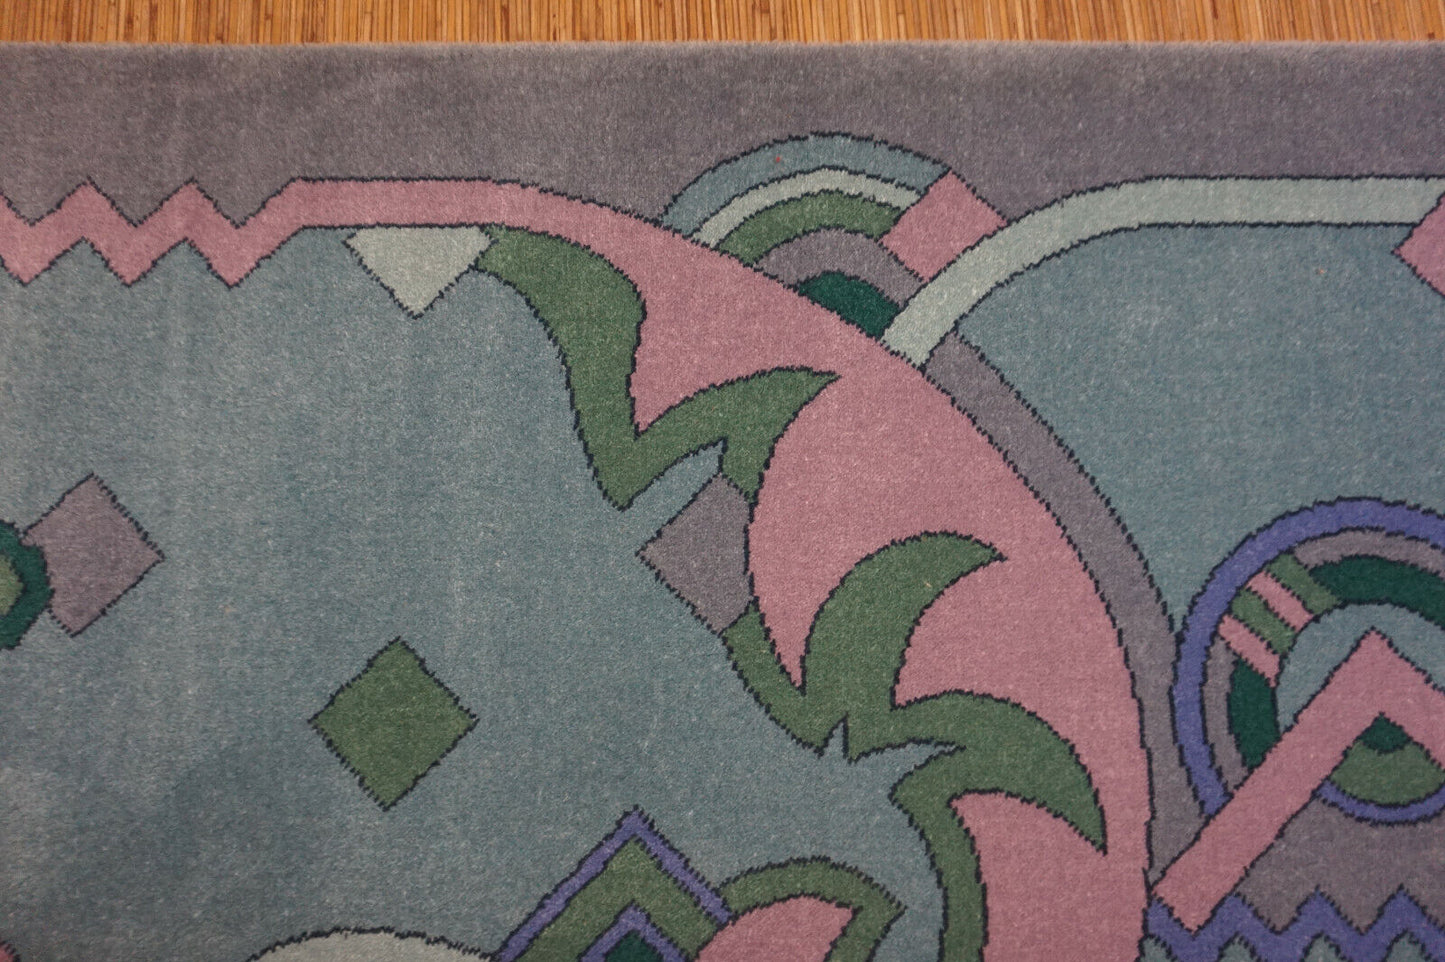 Unique piece of history showcased in the iconic 1970s art style of the B&C 'Crystallo' Rug